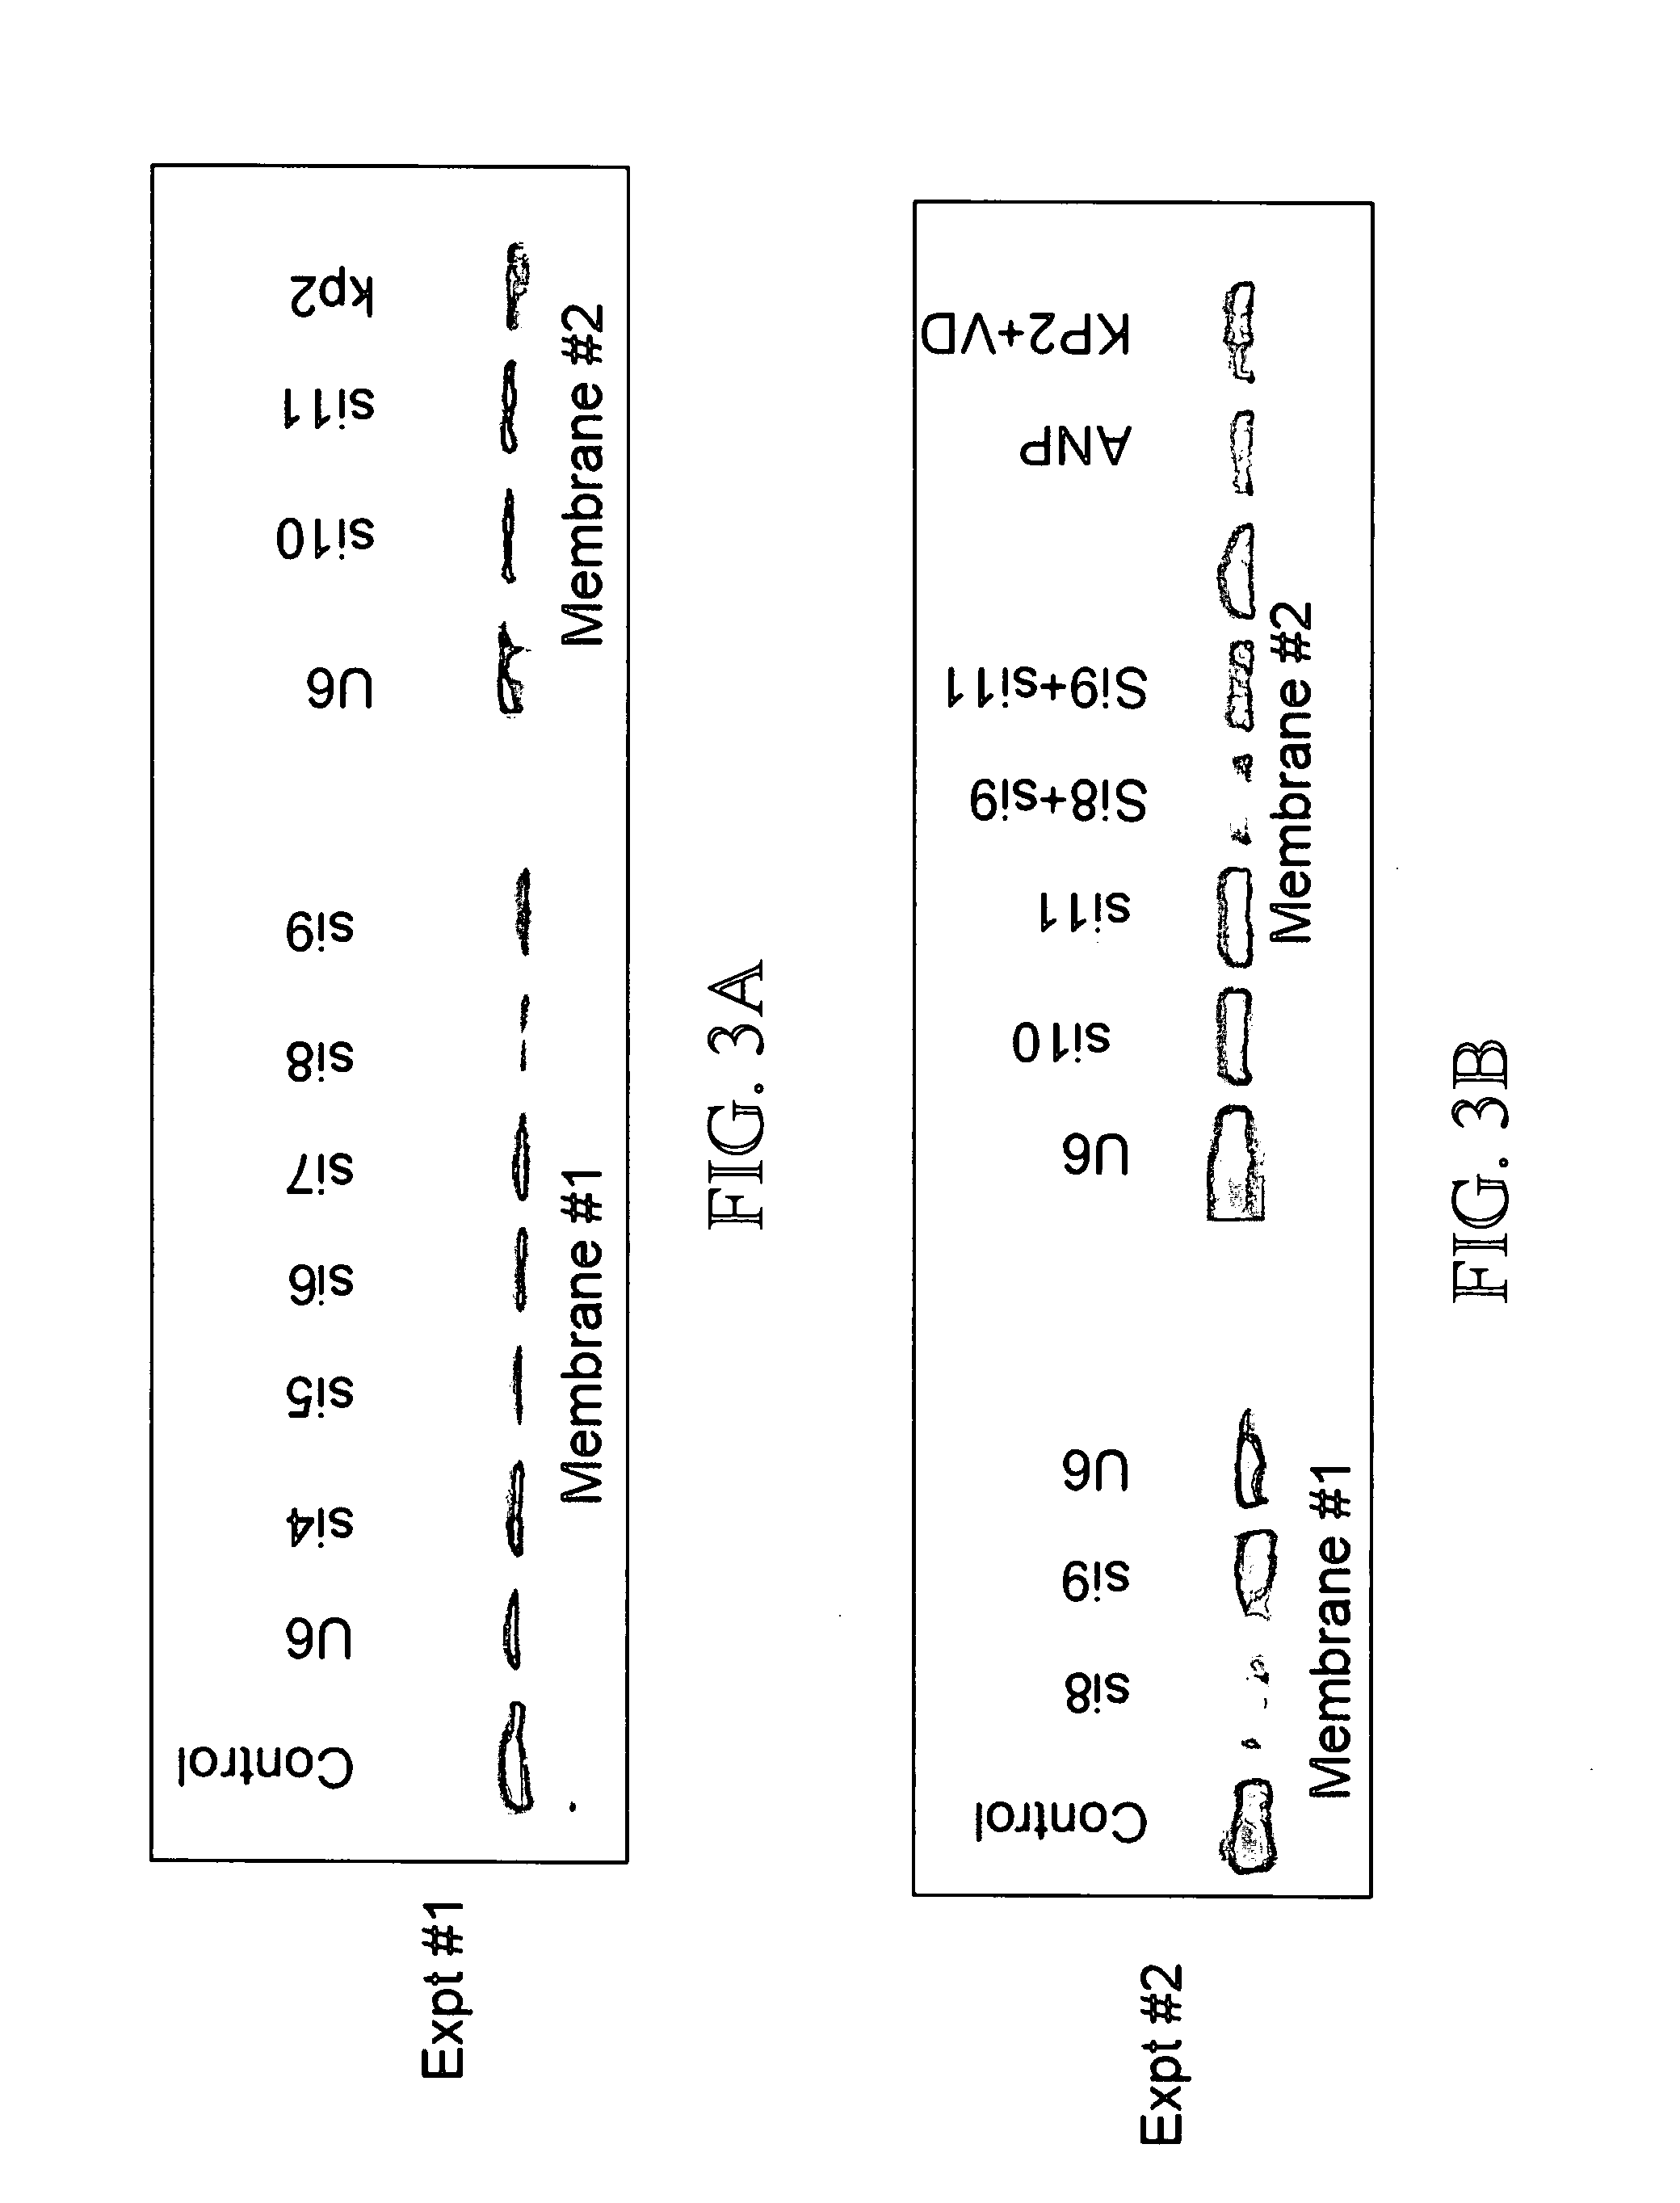 Materials and methods for reducing inflammation by inhibition of the atrial natriuretic peptide receptor